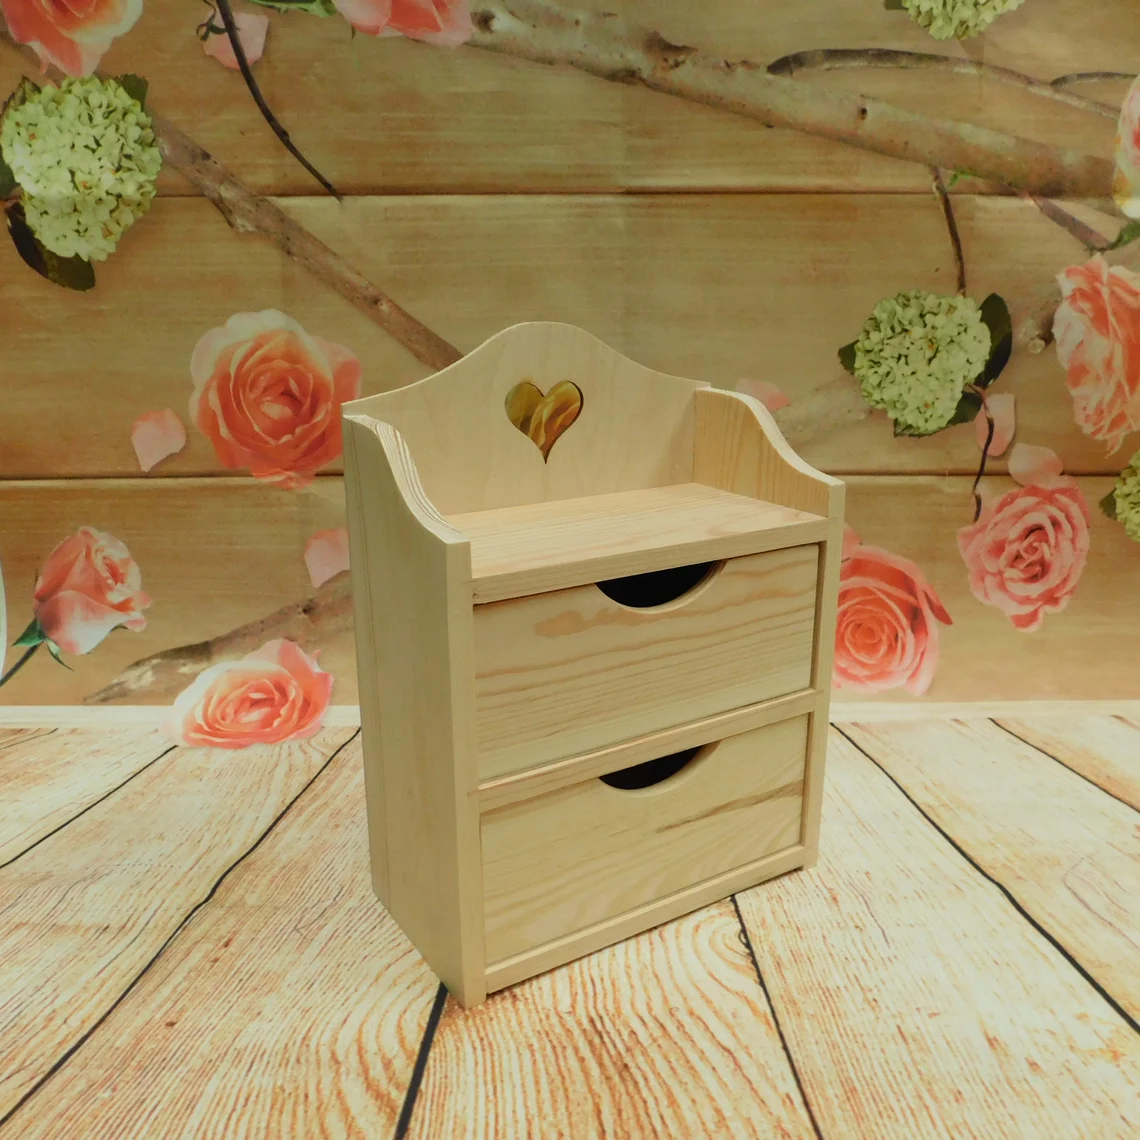 Unpainted Wooden Jewellery Case With Drawers